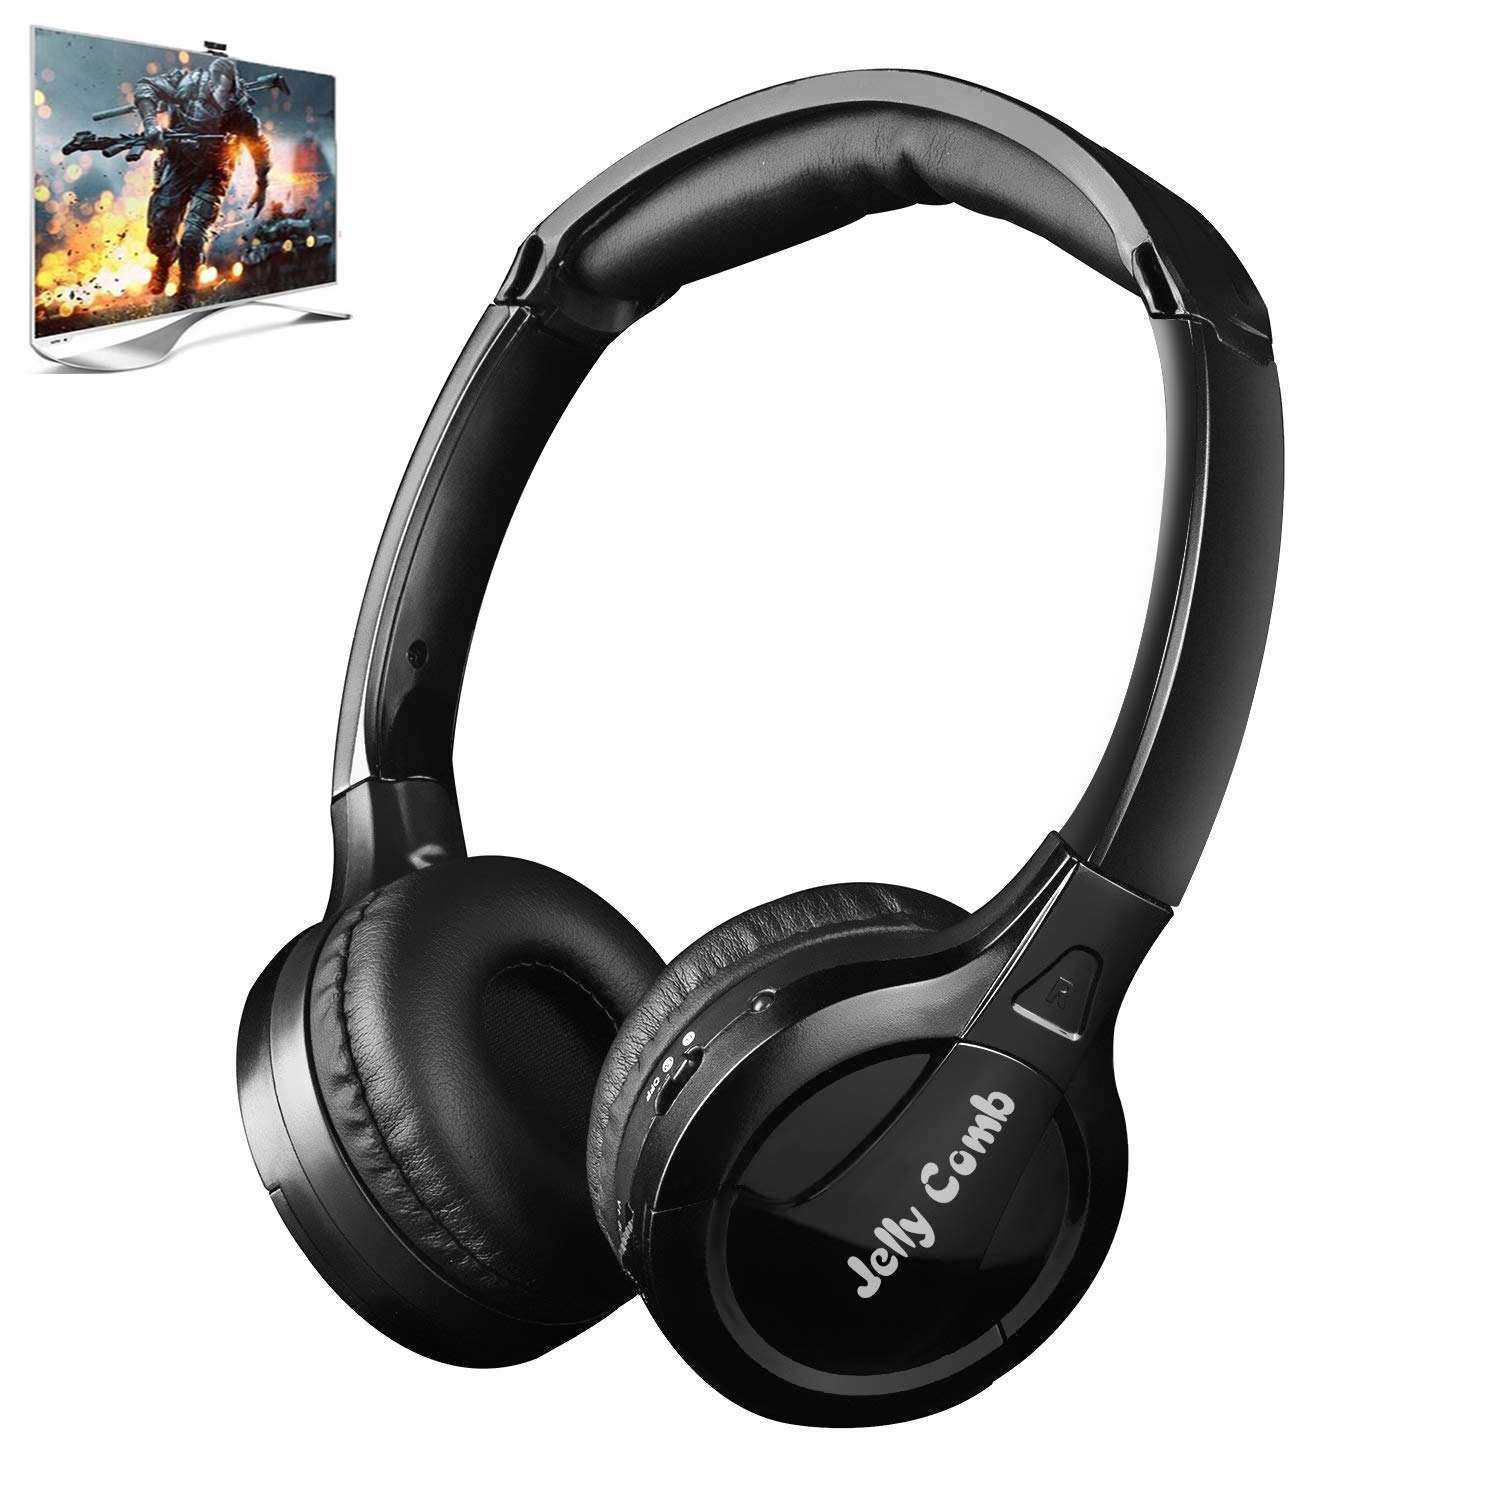 TV Headphones,Wireless Headphones for TV with Transmitter with Optical ...